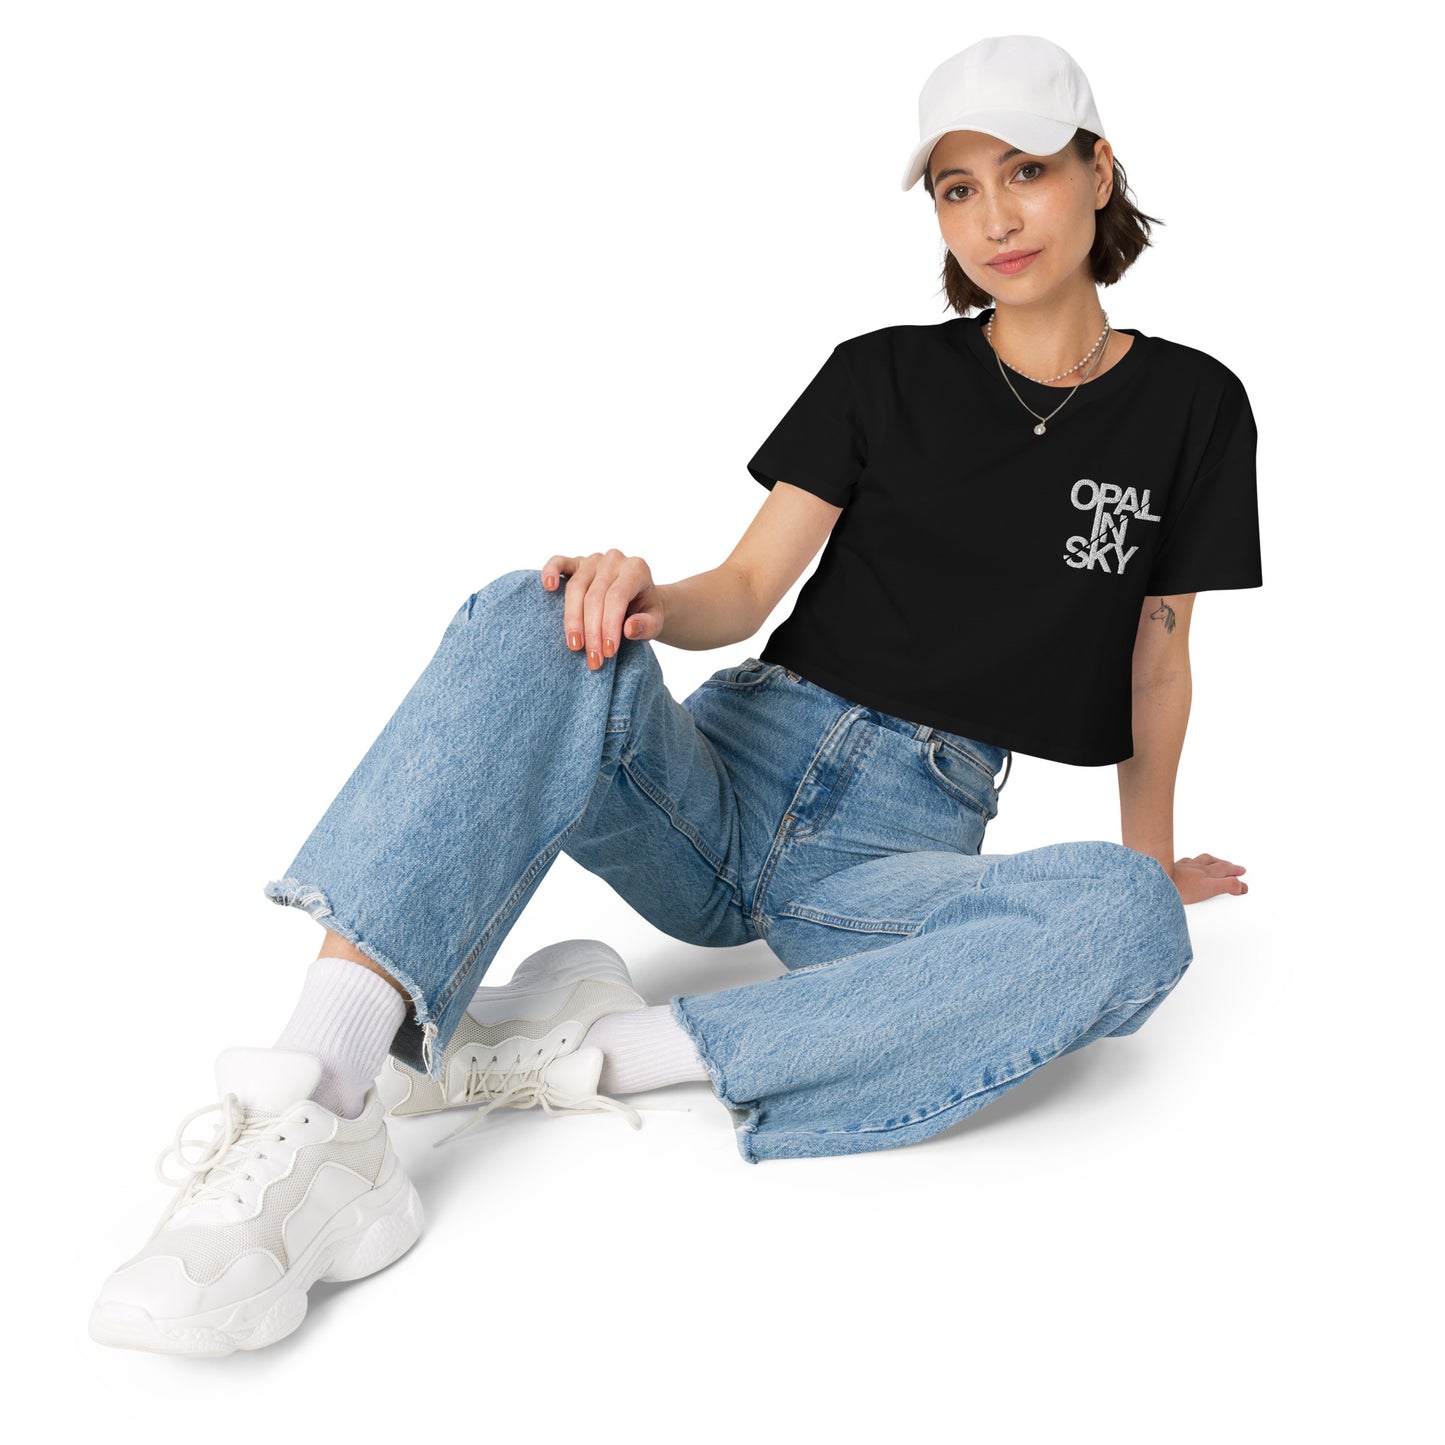 OPAL IN SKY “LOGO” Embroidered Women’s Crop Top